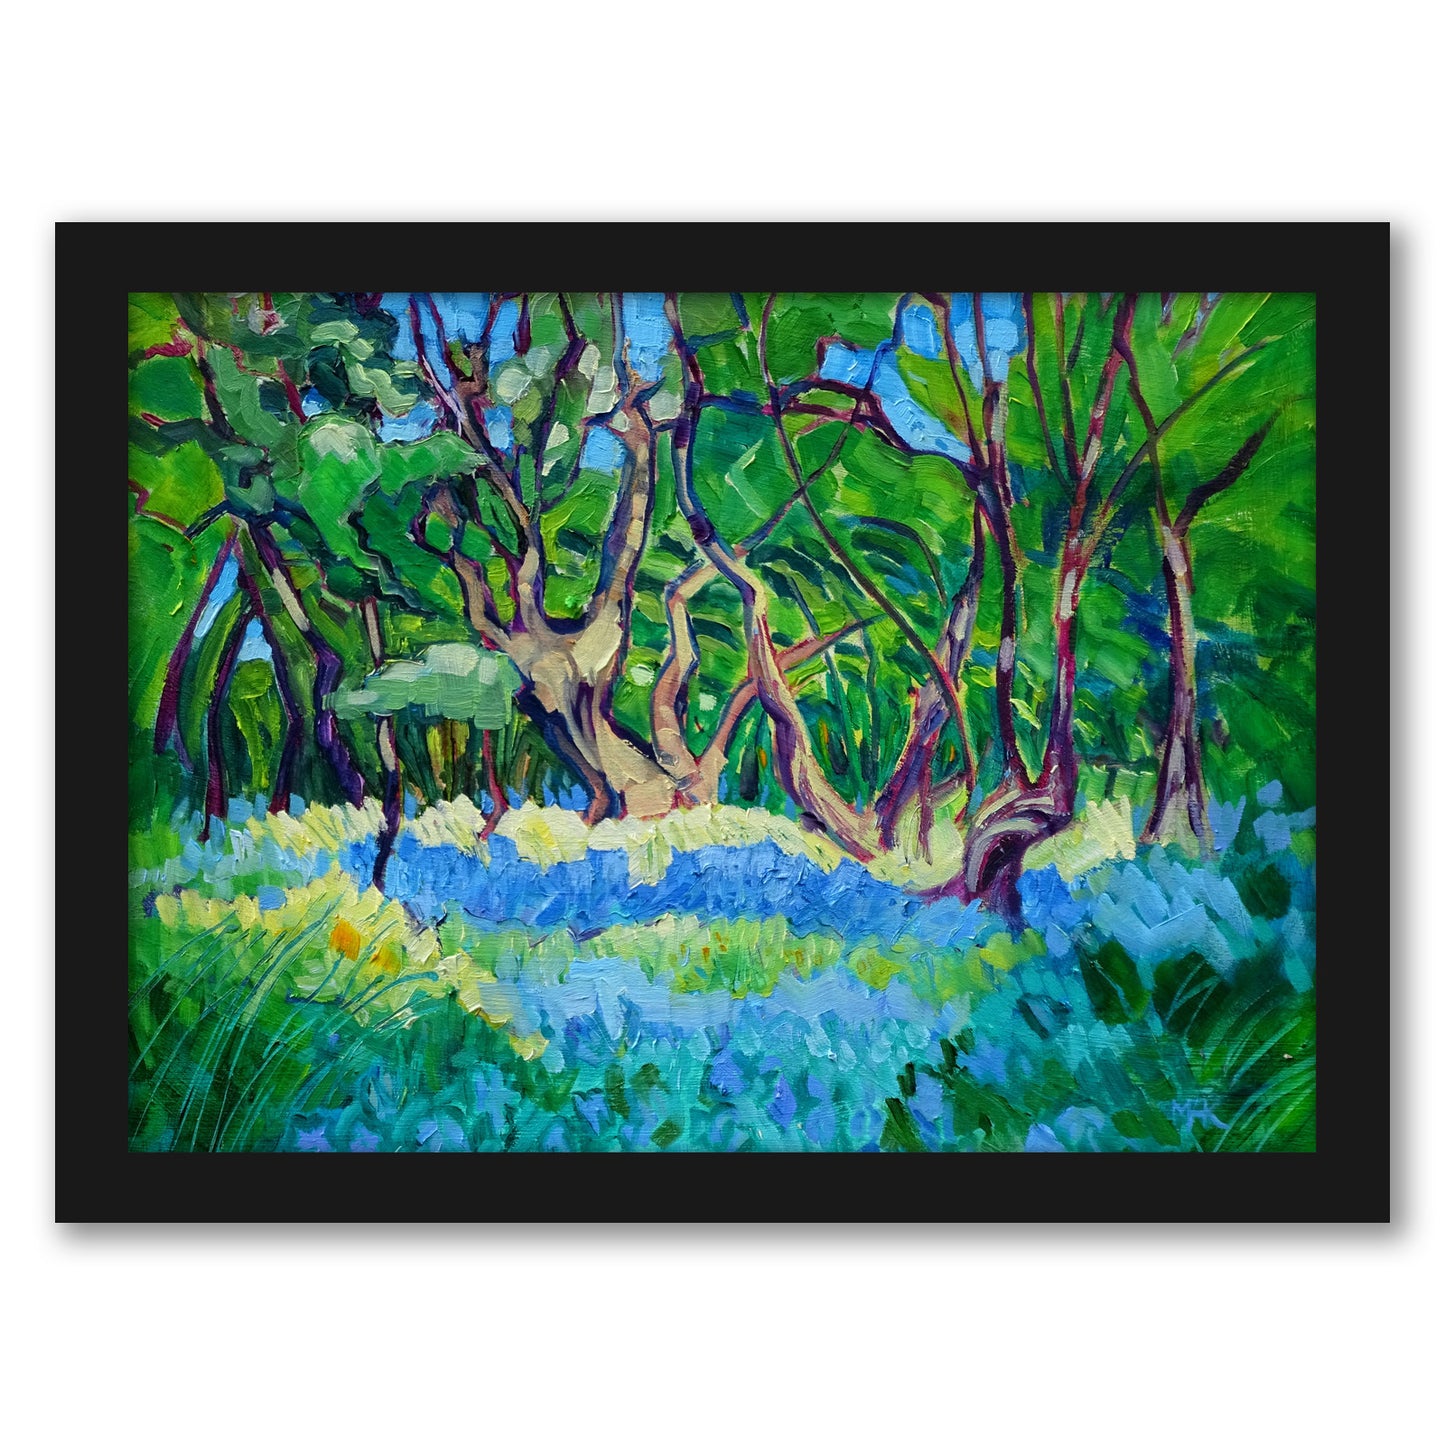 Bluebell Wood By Mary Kemp - Framed Print